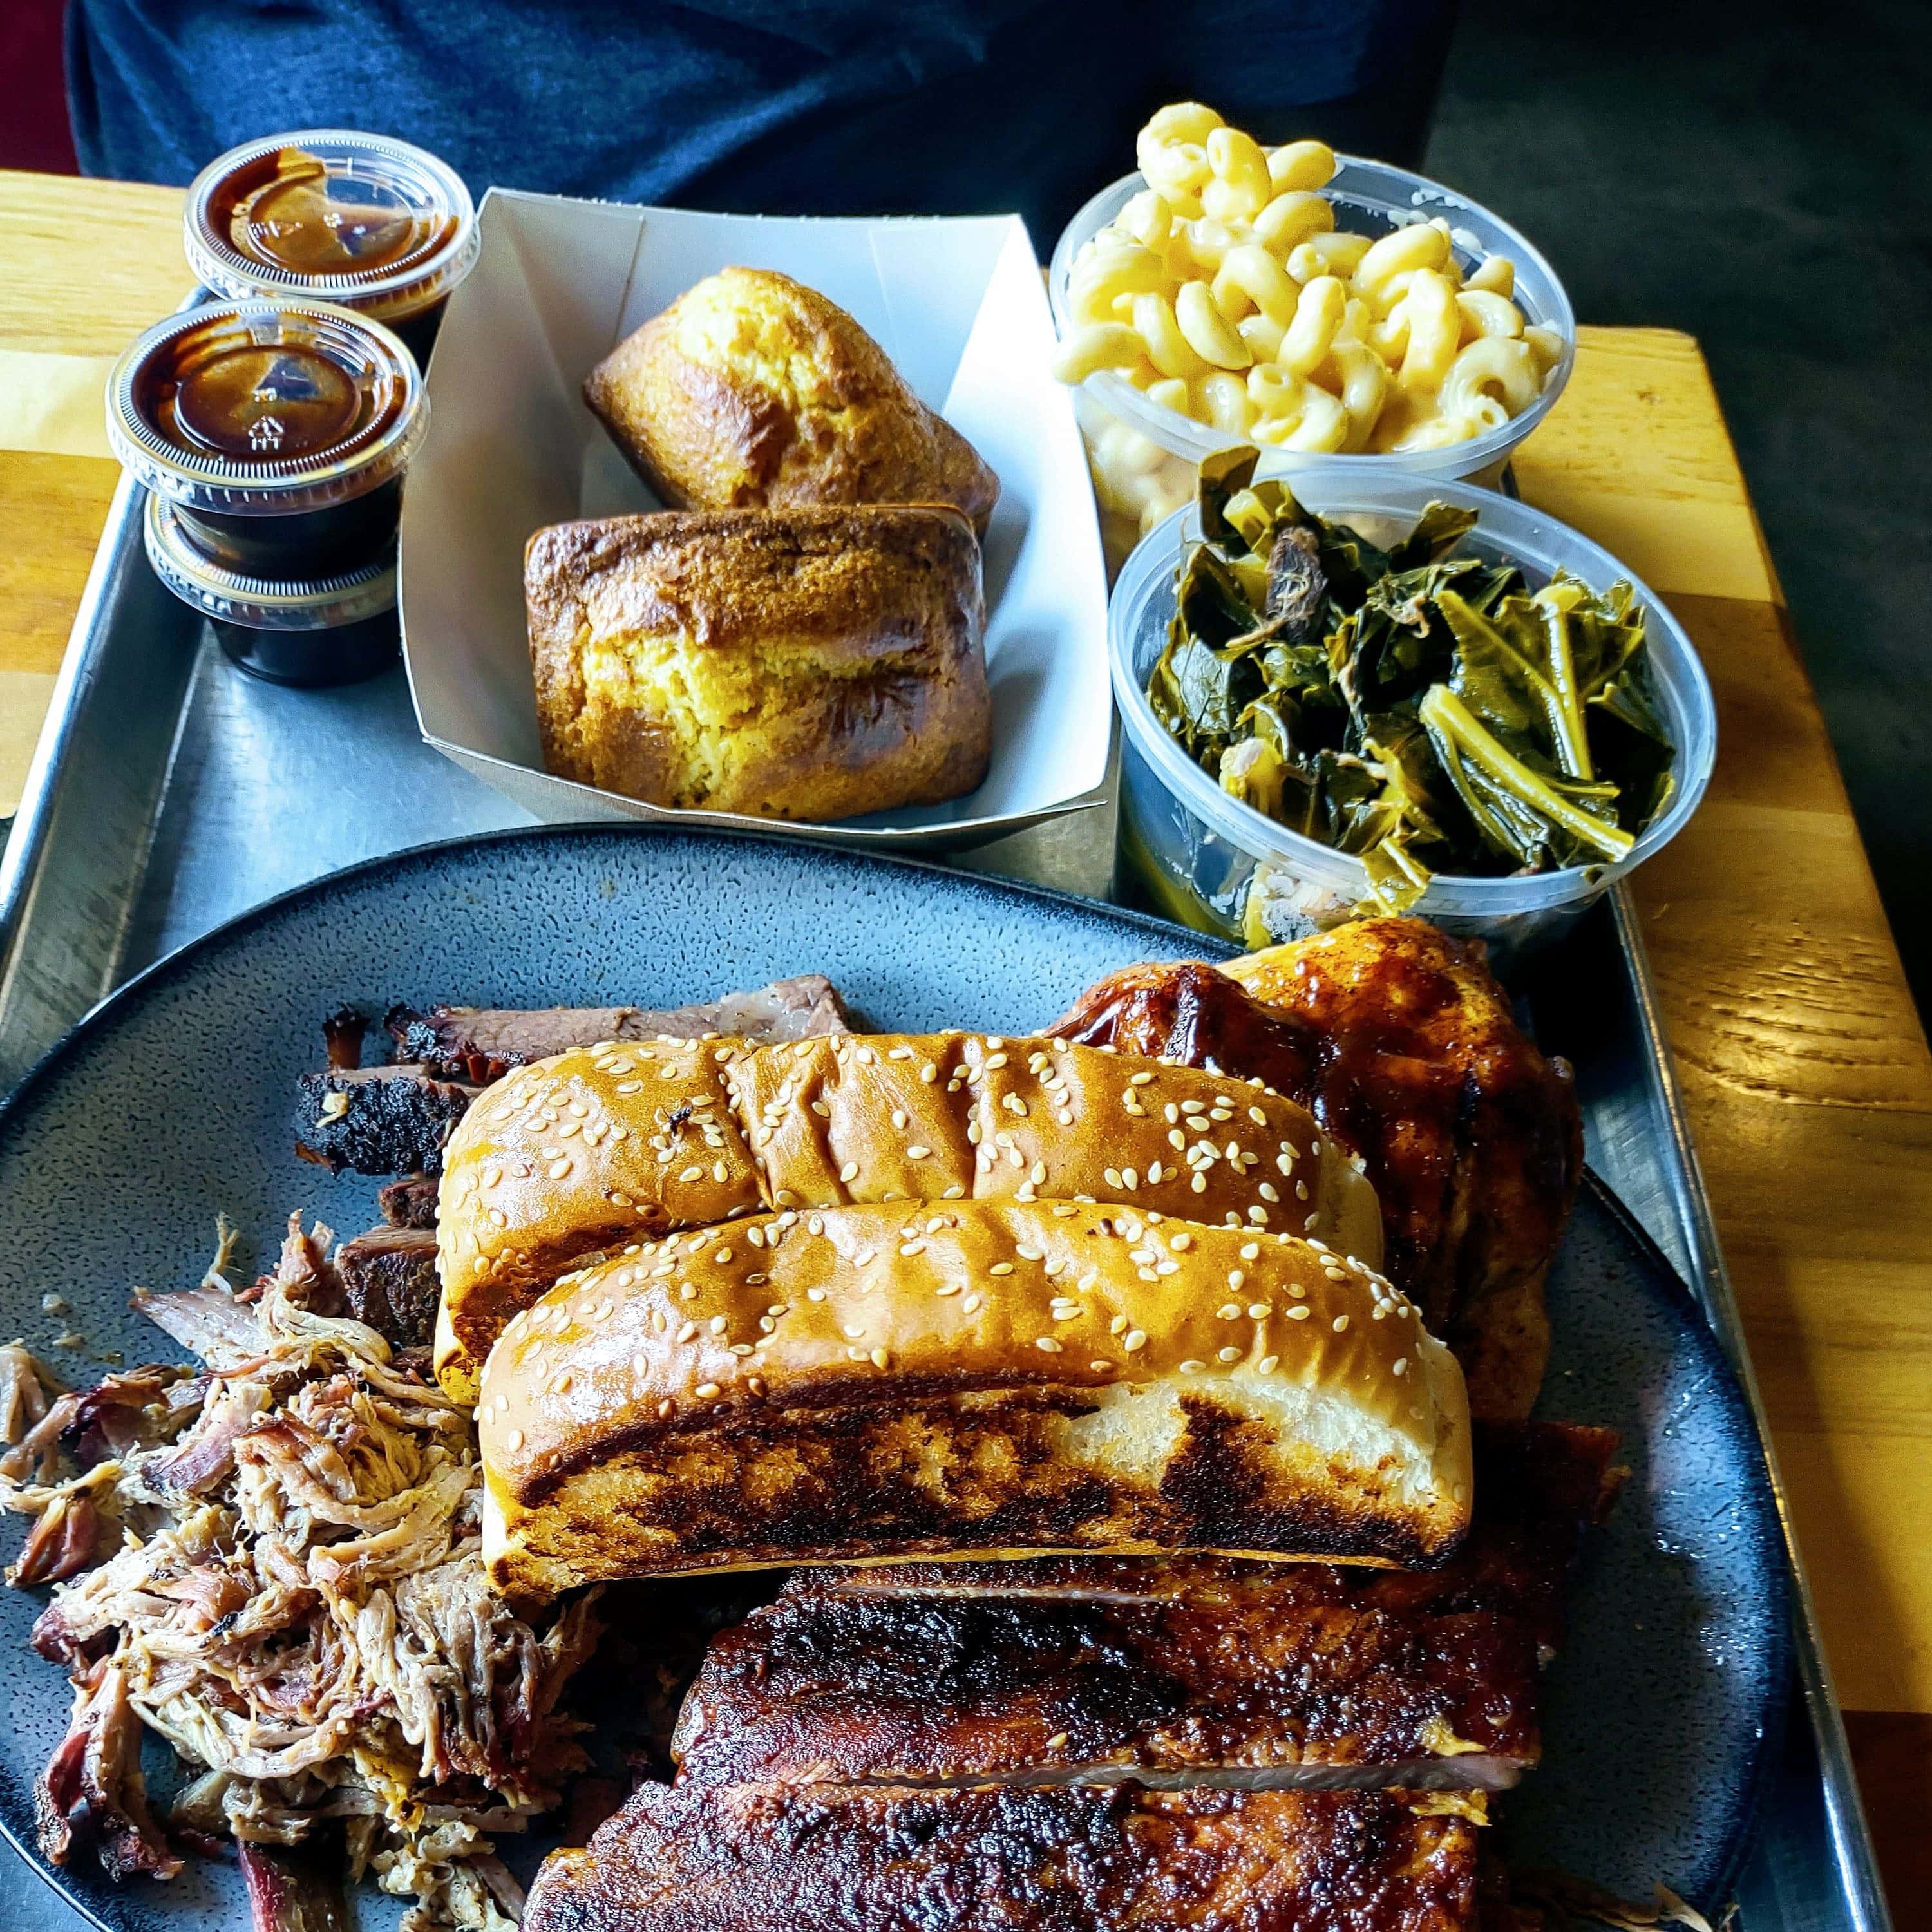 City Barbeque and Catering - Toledo (OH 43617), US, lunch nearby